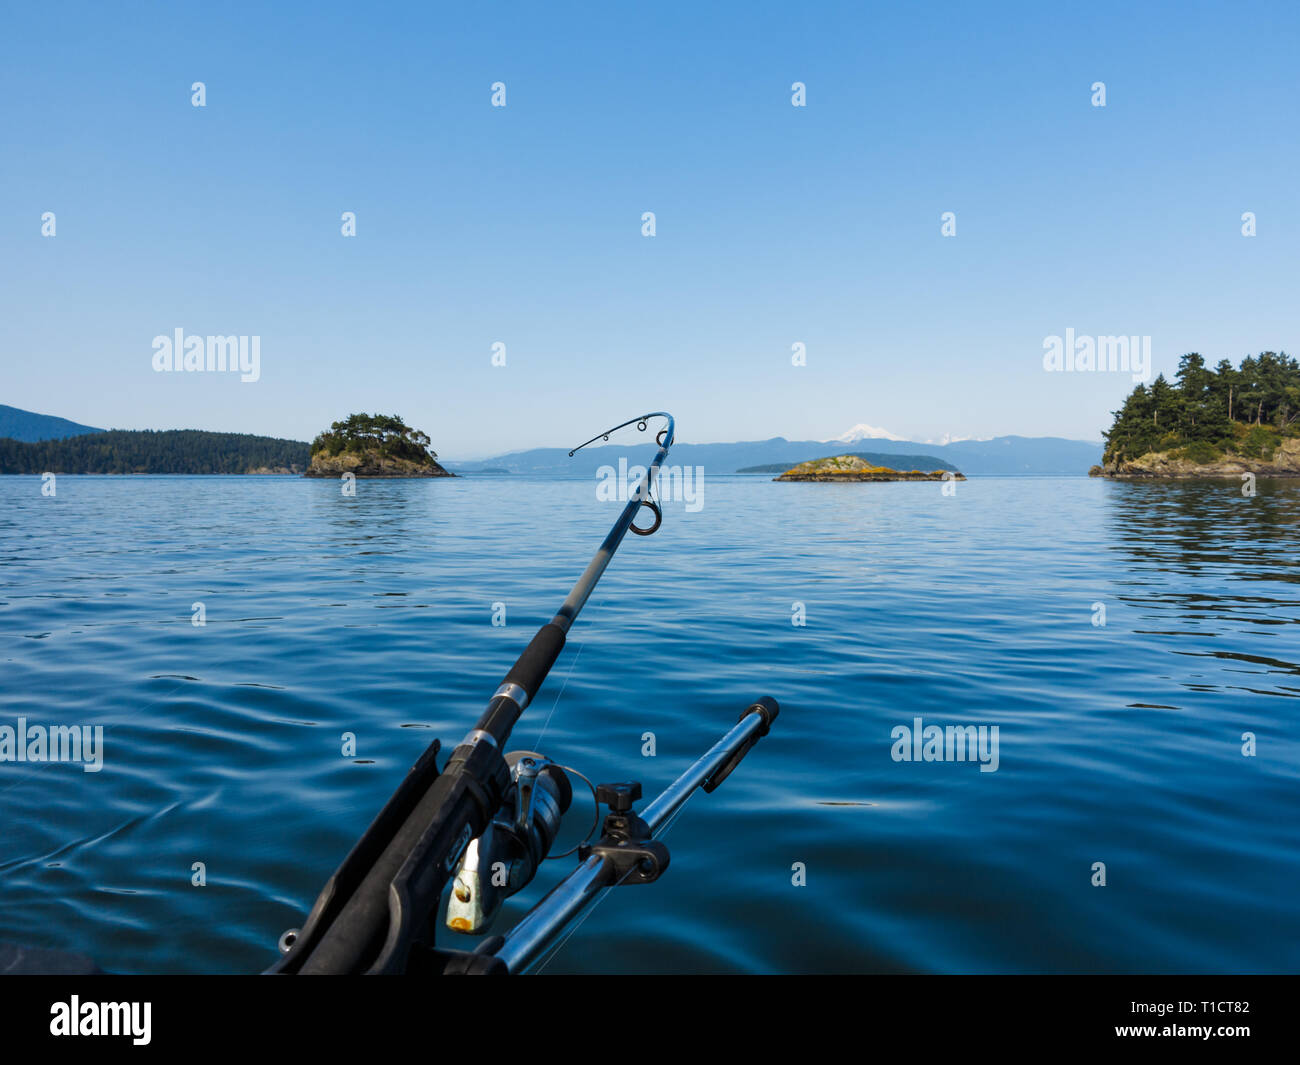 Closeup of fishing rod extending from boat in middle of bay with